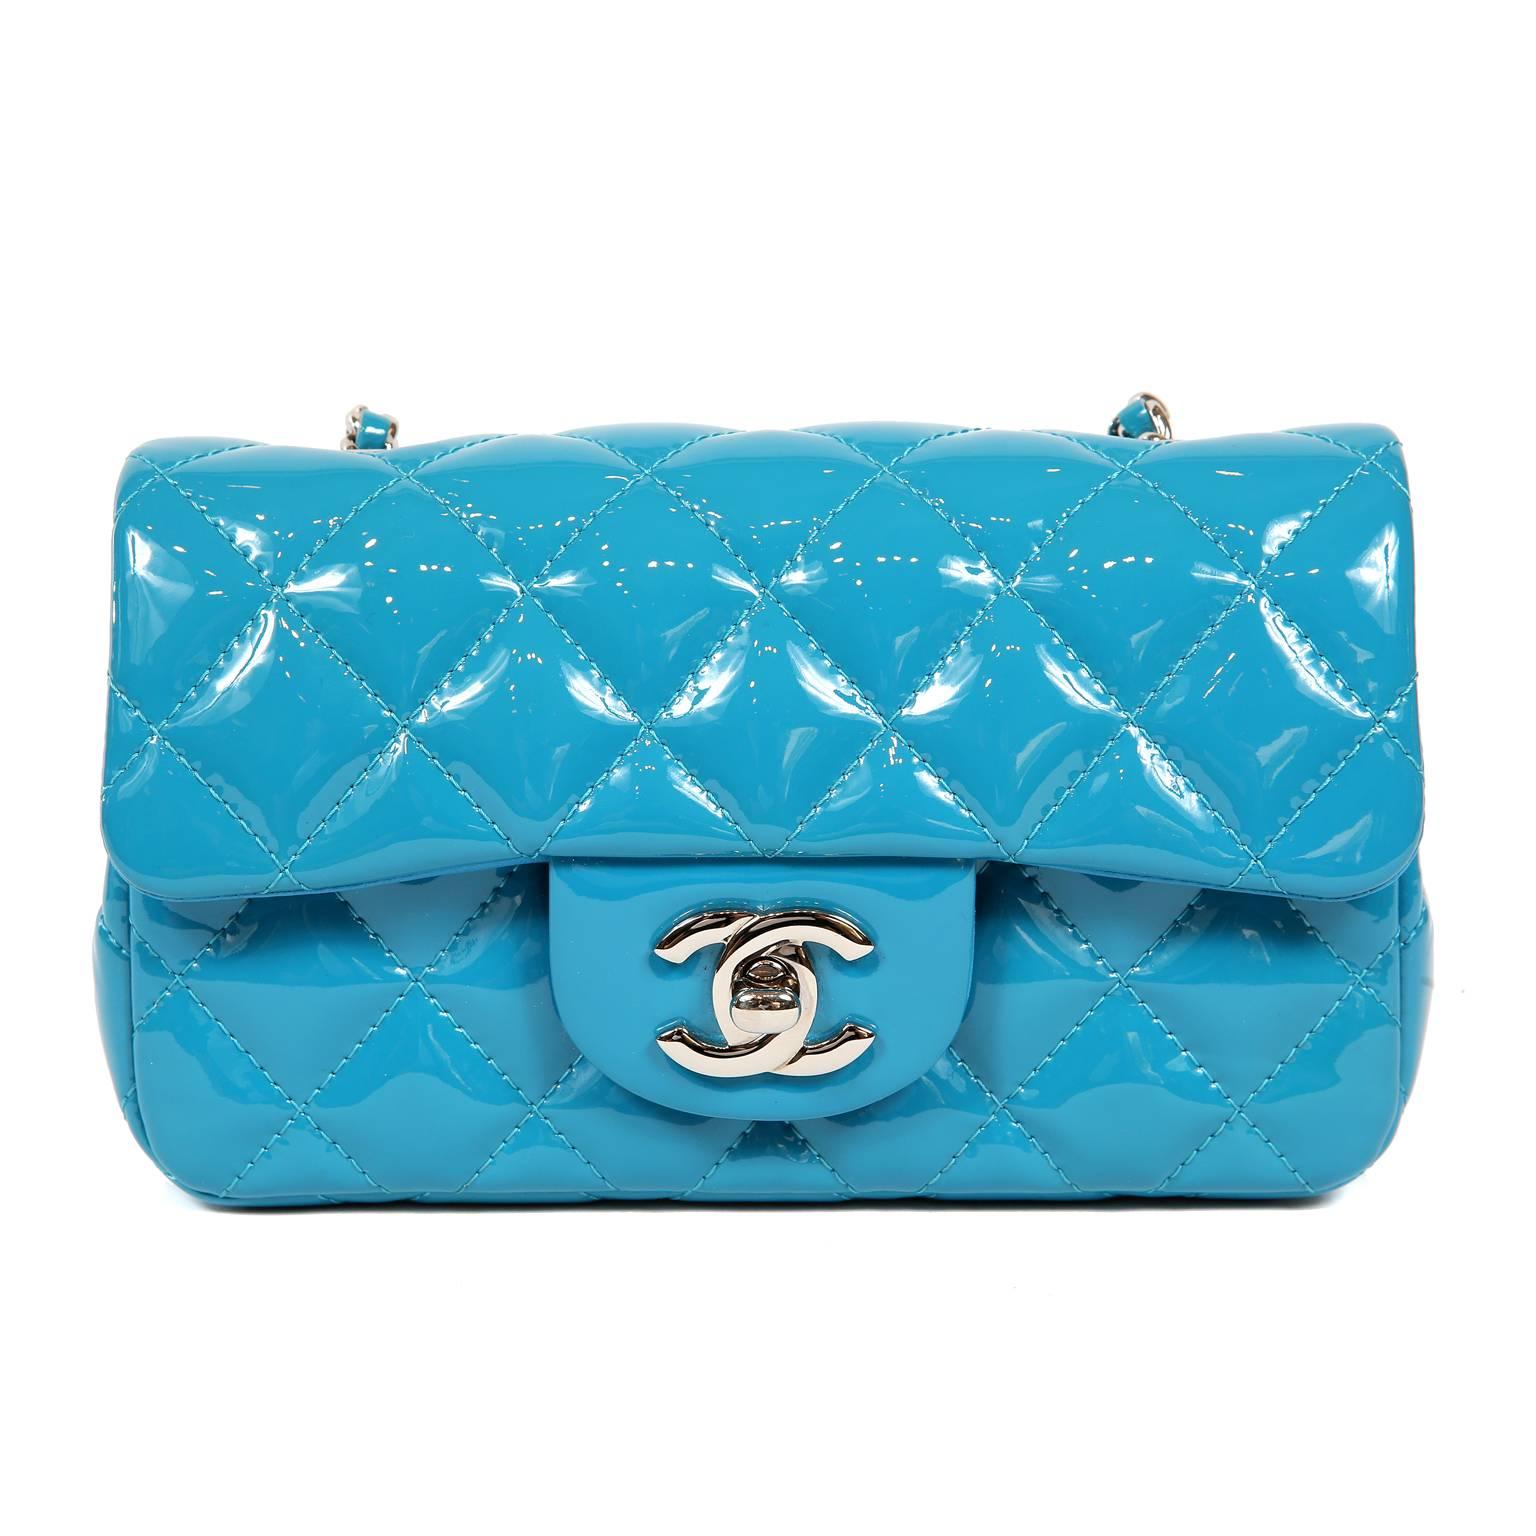 Blue Chanel Turquoise Patent Leather Mini Classic Flap Bag